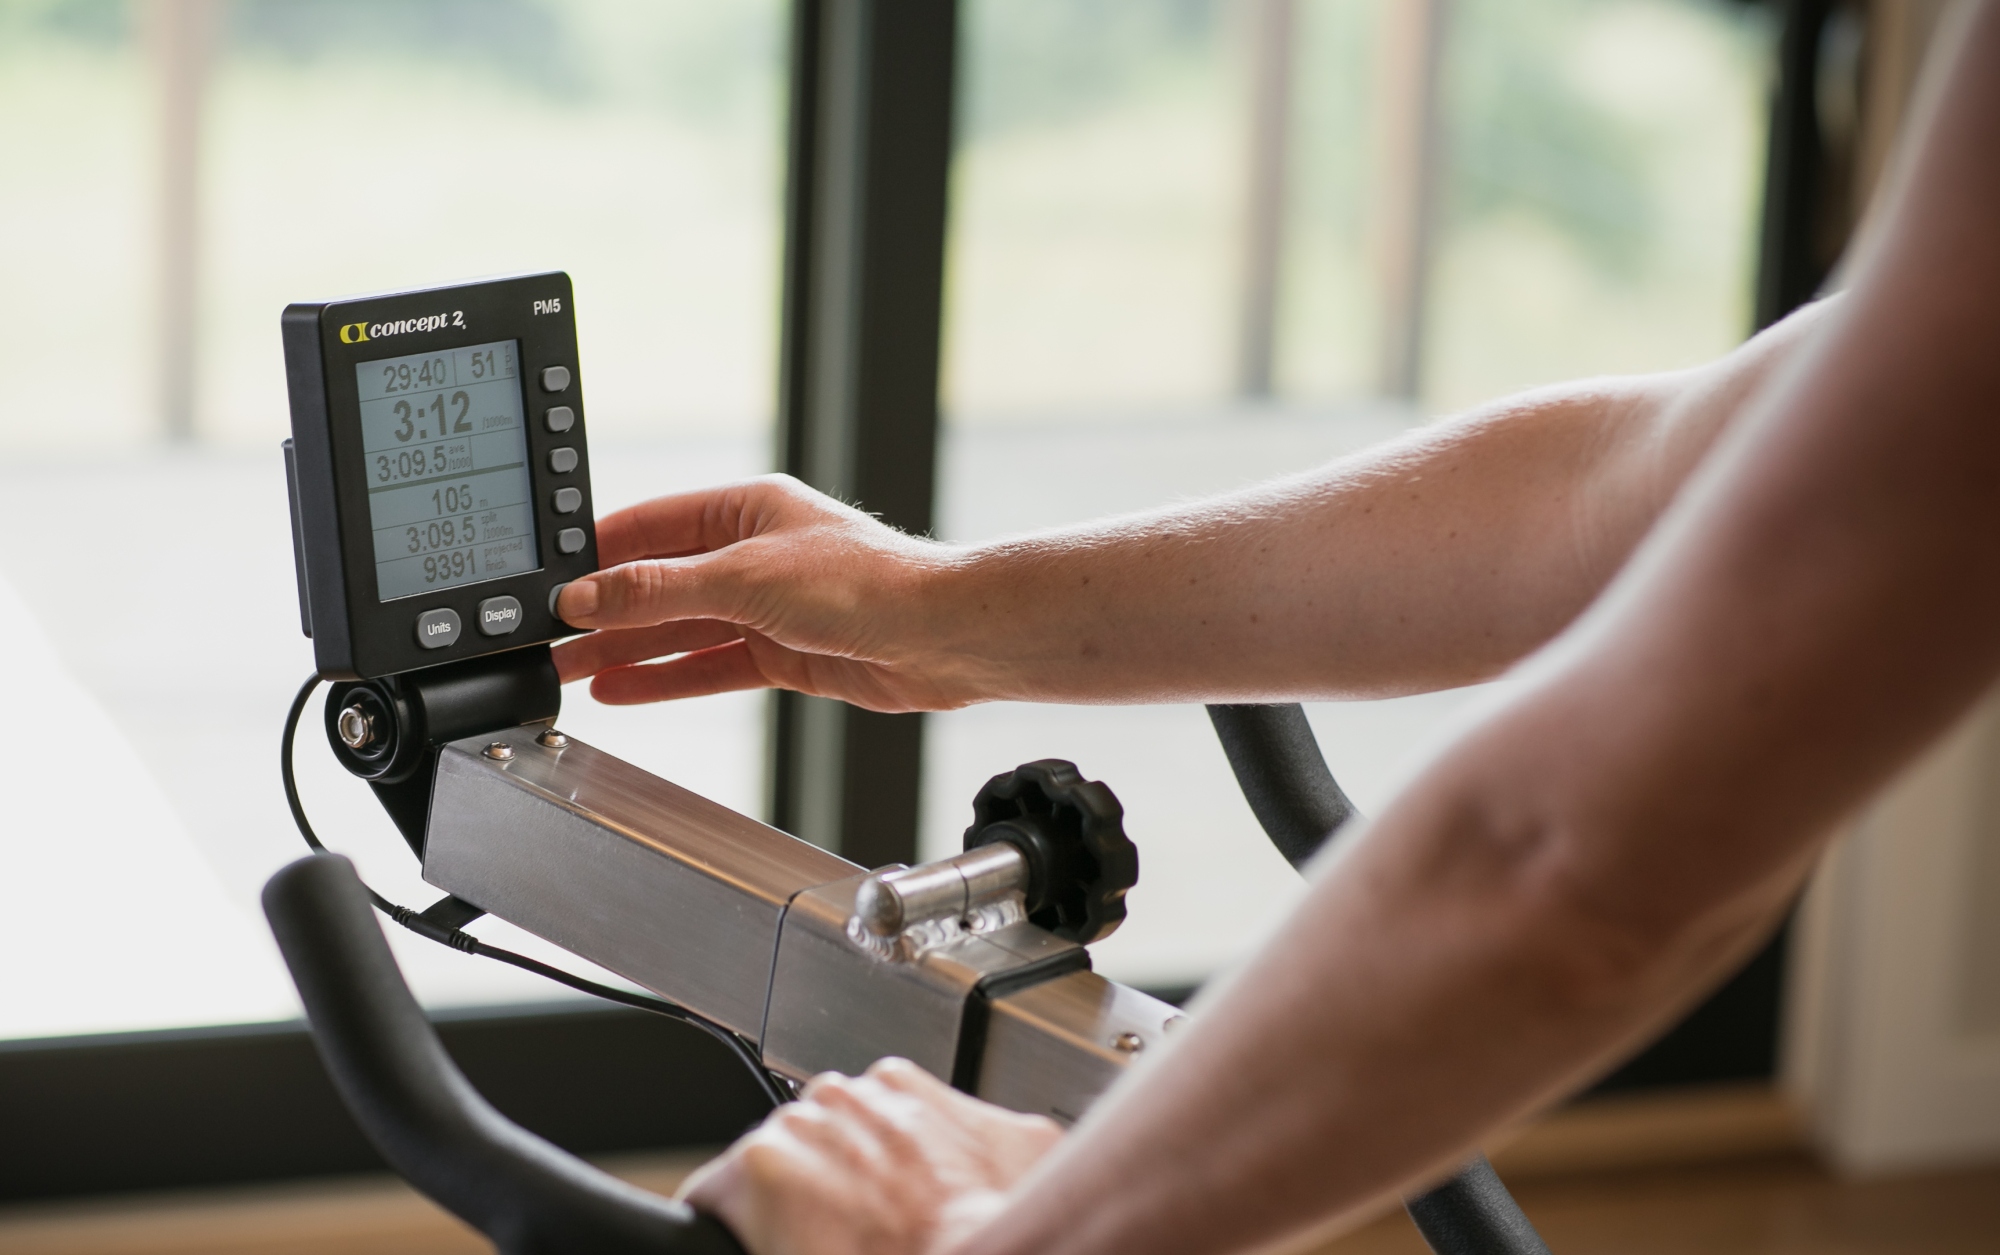 This image shows the handbars of a bike and a Concept2 BikeErg PM5 monitor being programmed by someones hands